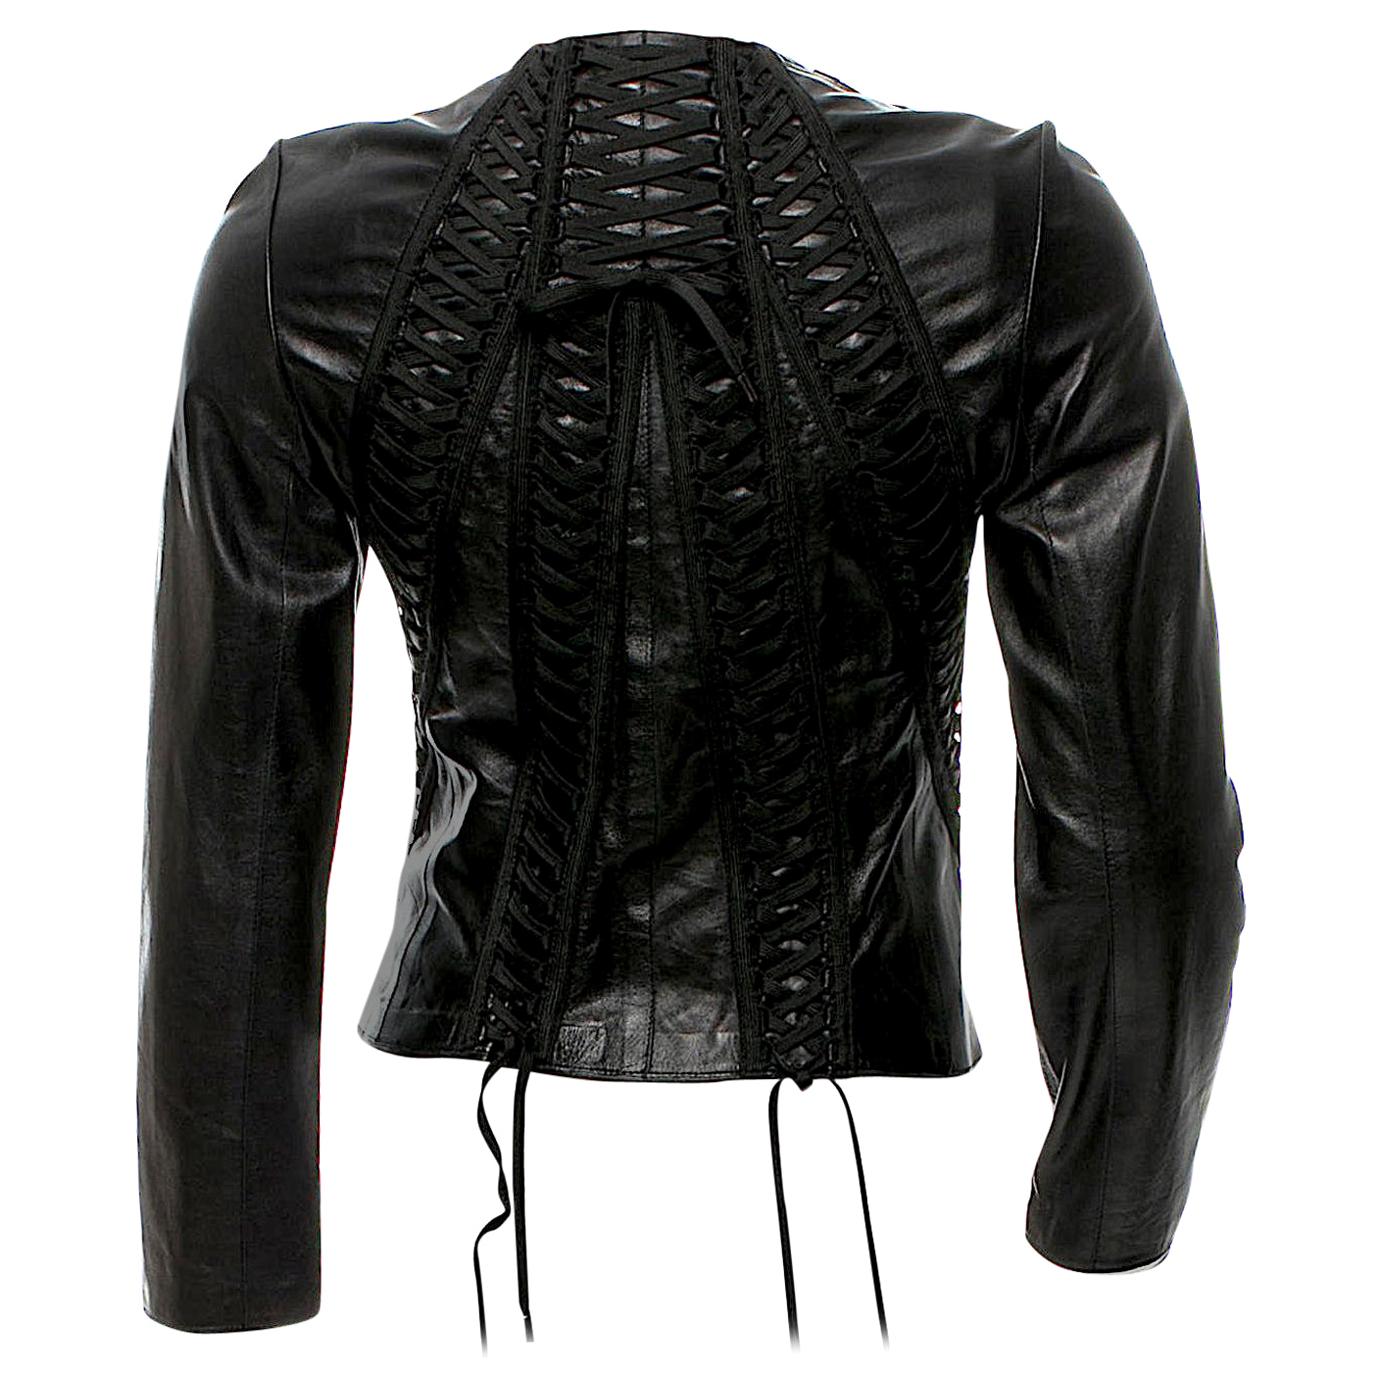 Christian Dior Black Lambskin Leather Corset Laced Bondage Jacket by Galliano For Sale